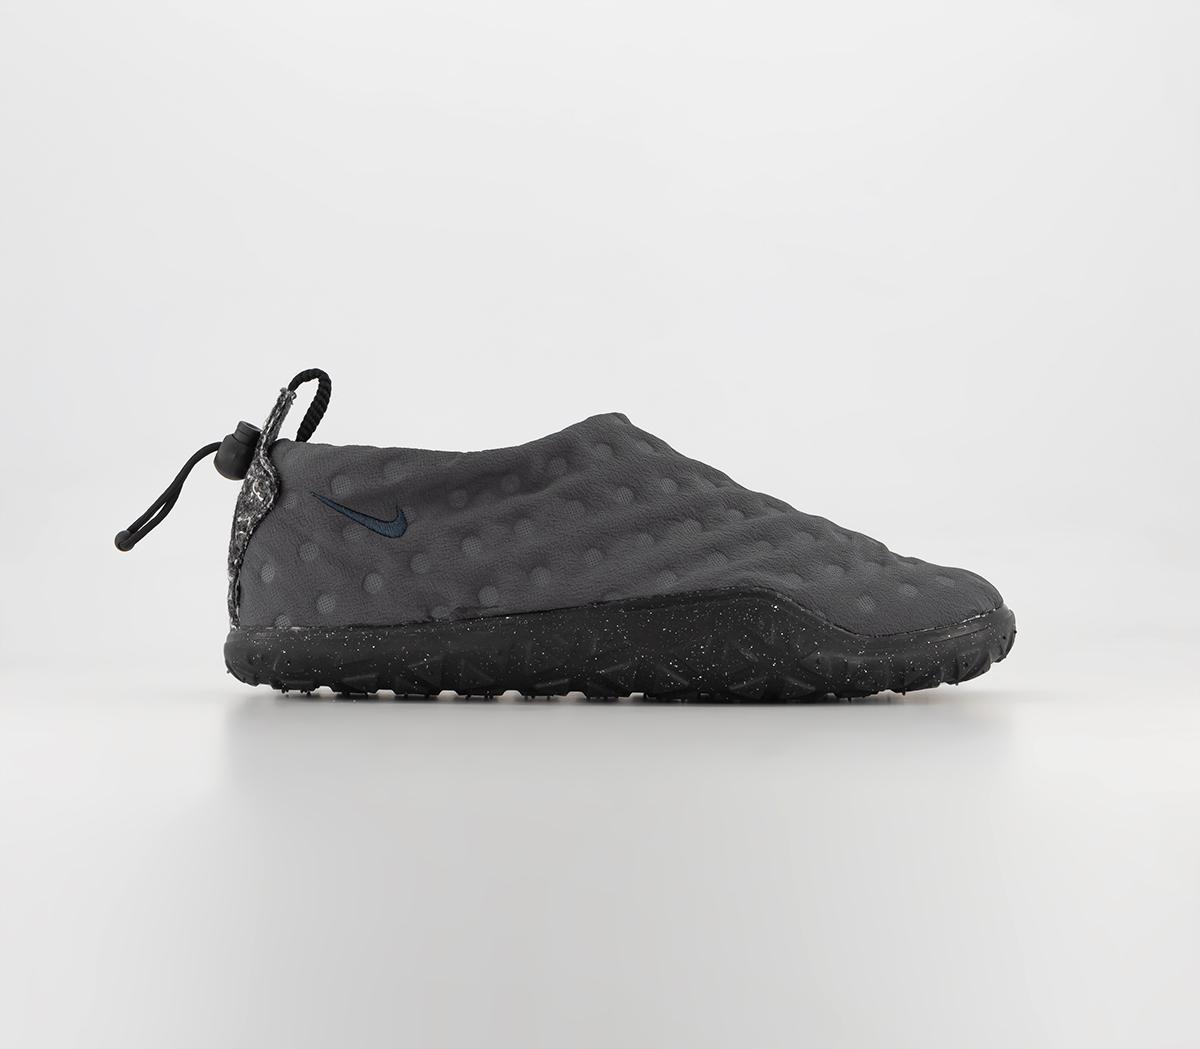 Nike ACG Moc 3.5 Shoes Anthracite Black - Men's Trainers